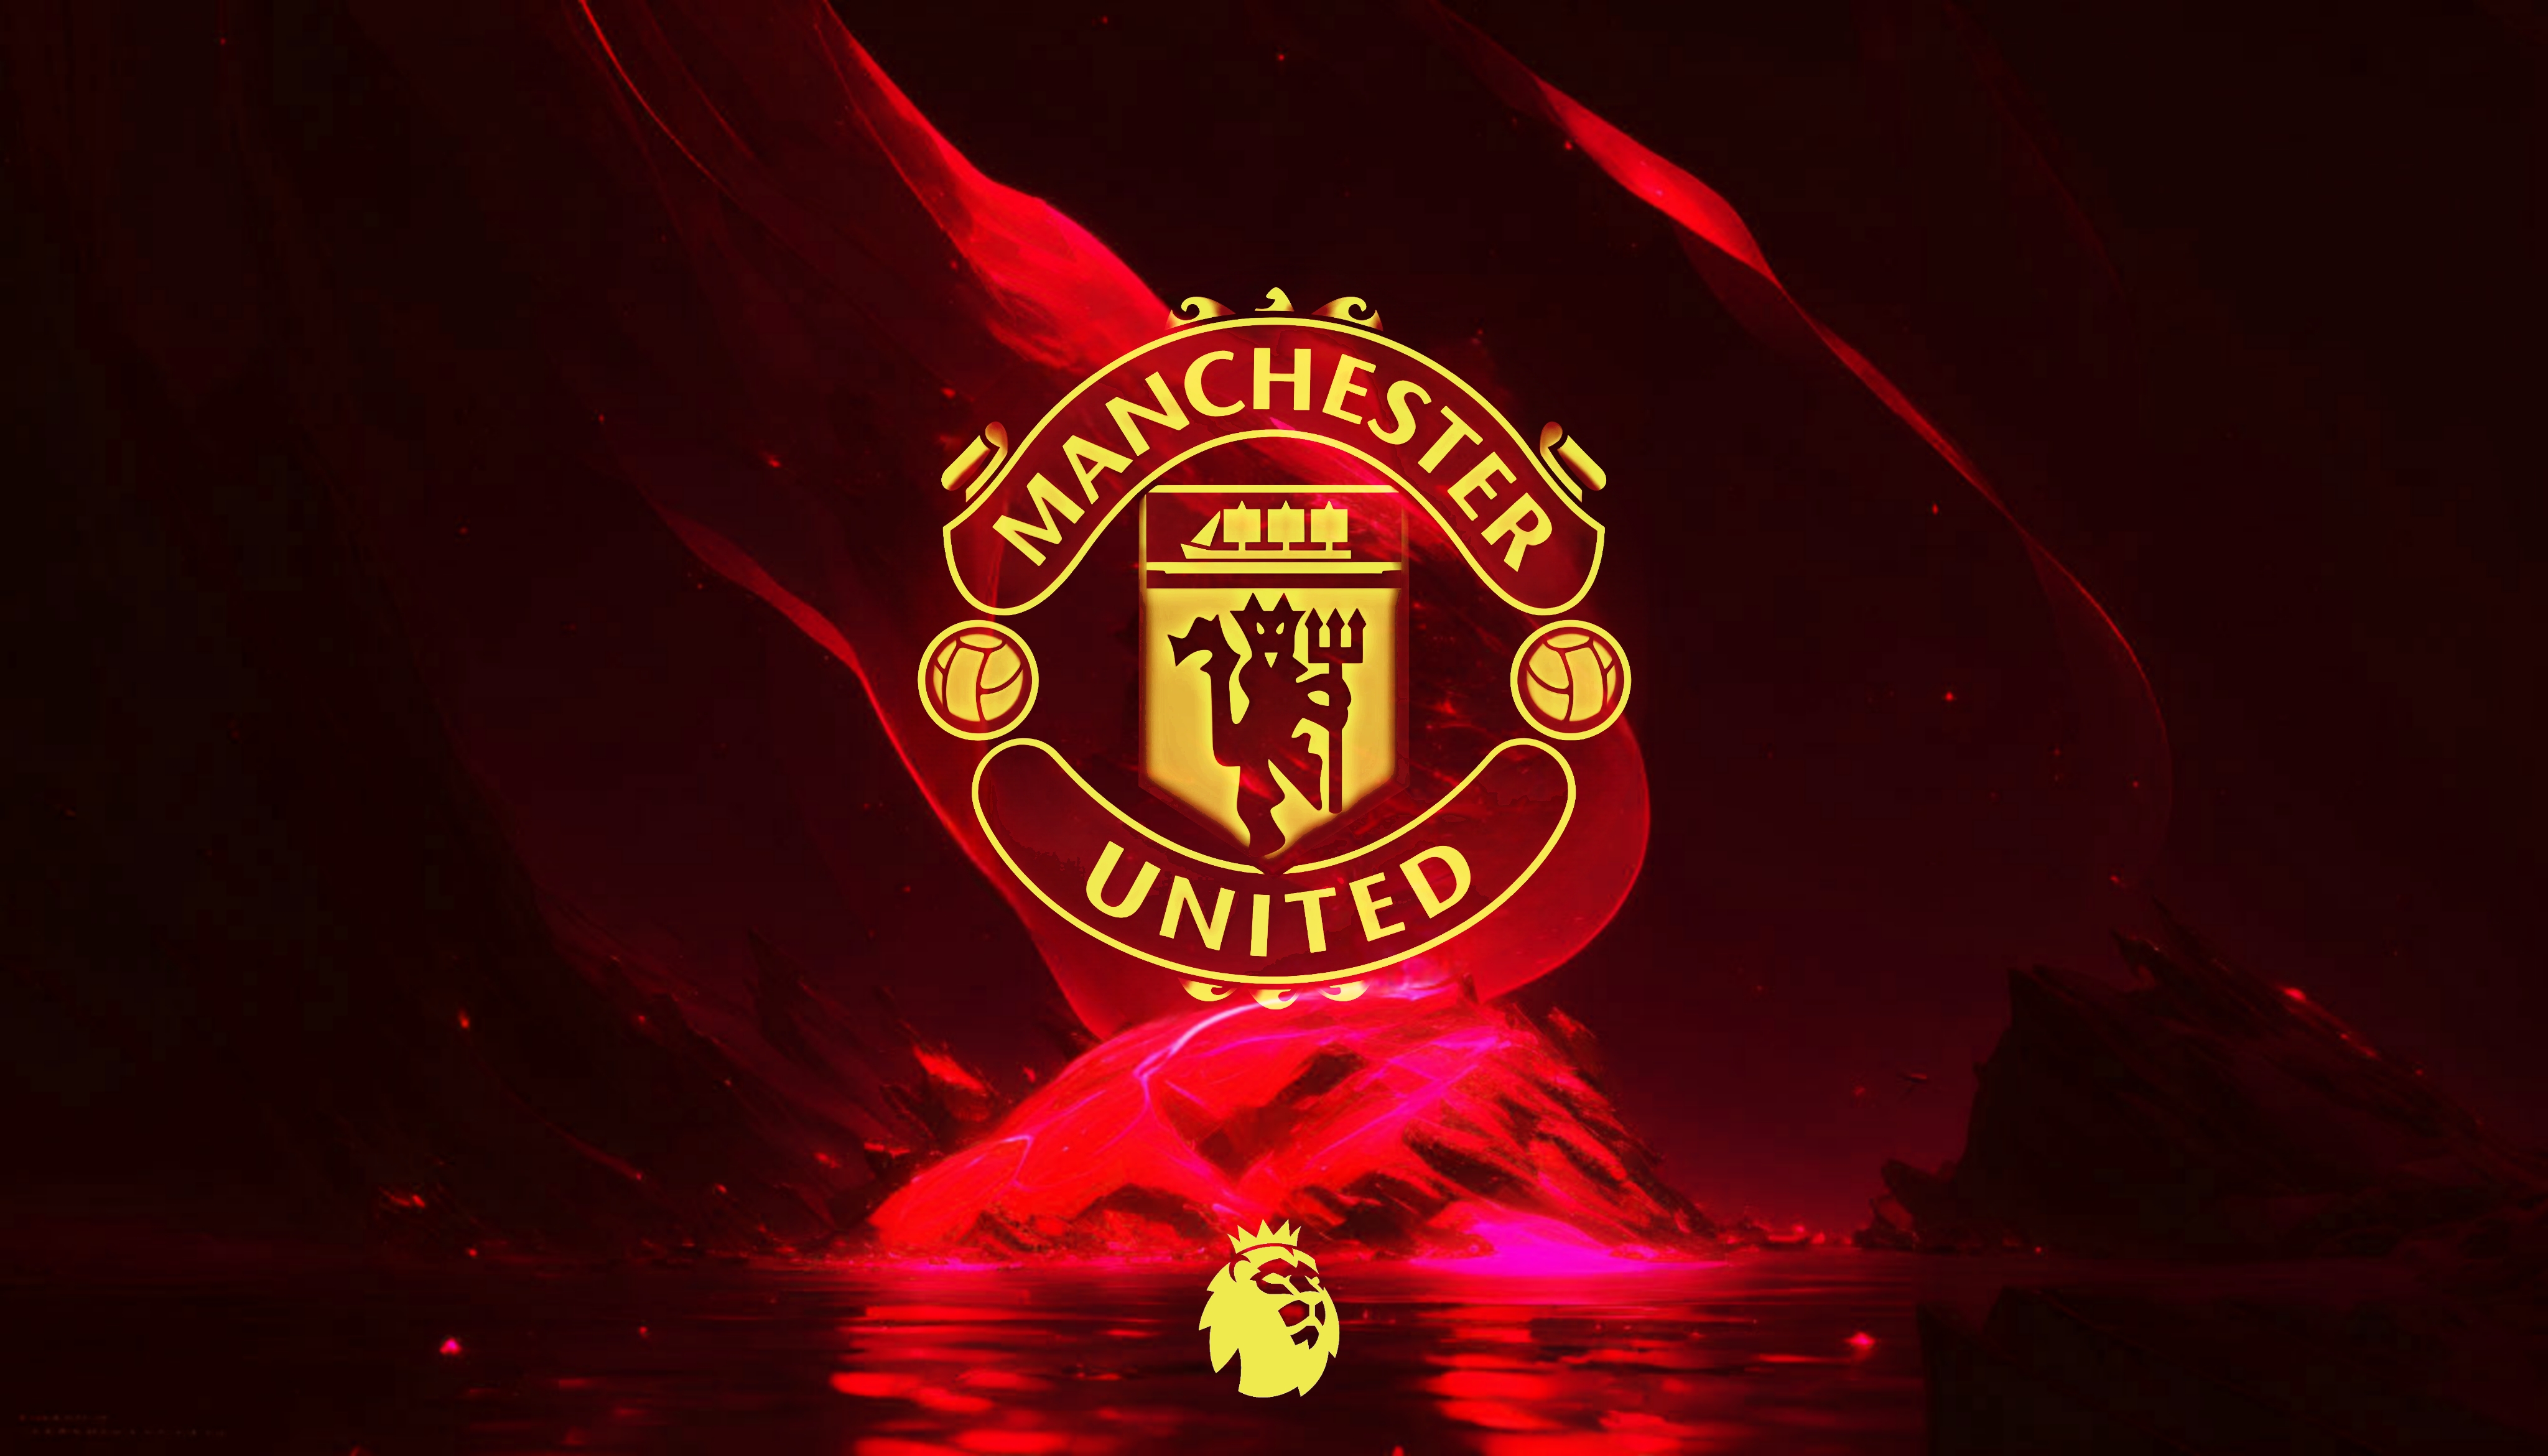 Inferno: Manchester United FC by Z A Y N O S